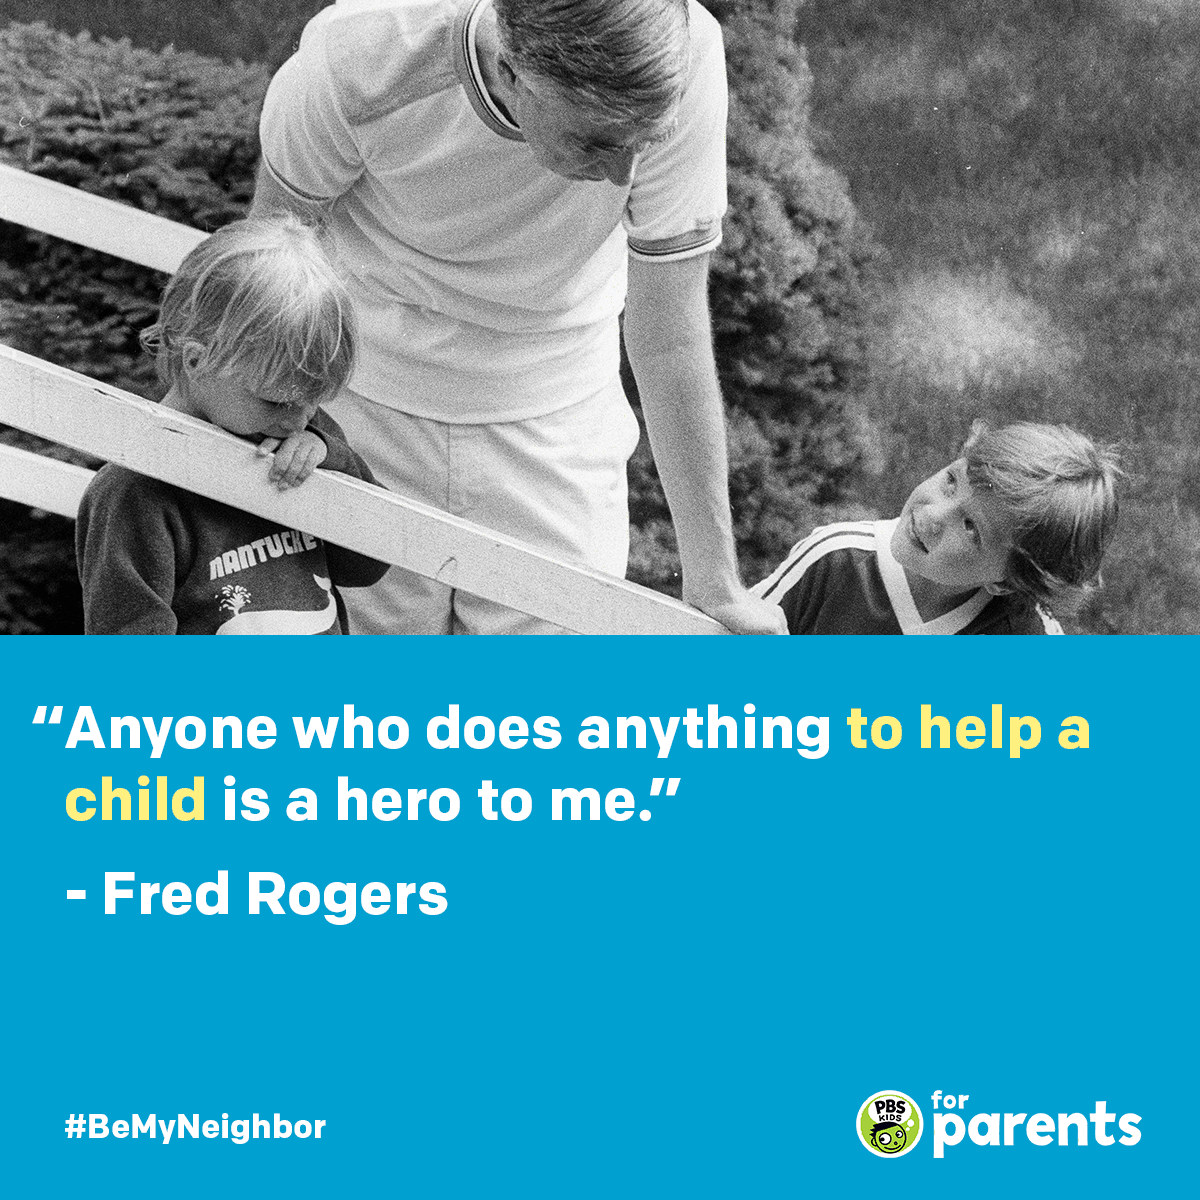 "Anyone who does anything to help a child is a hero to me." - Fred Rogers